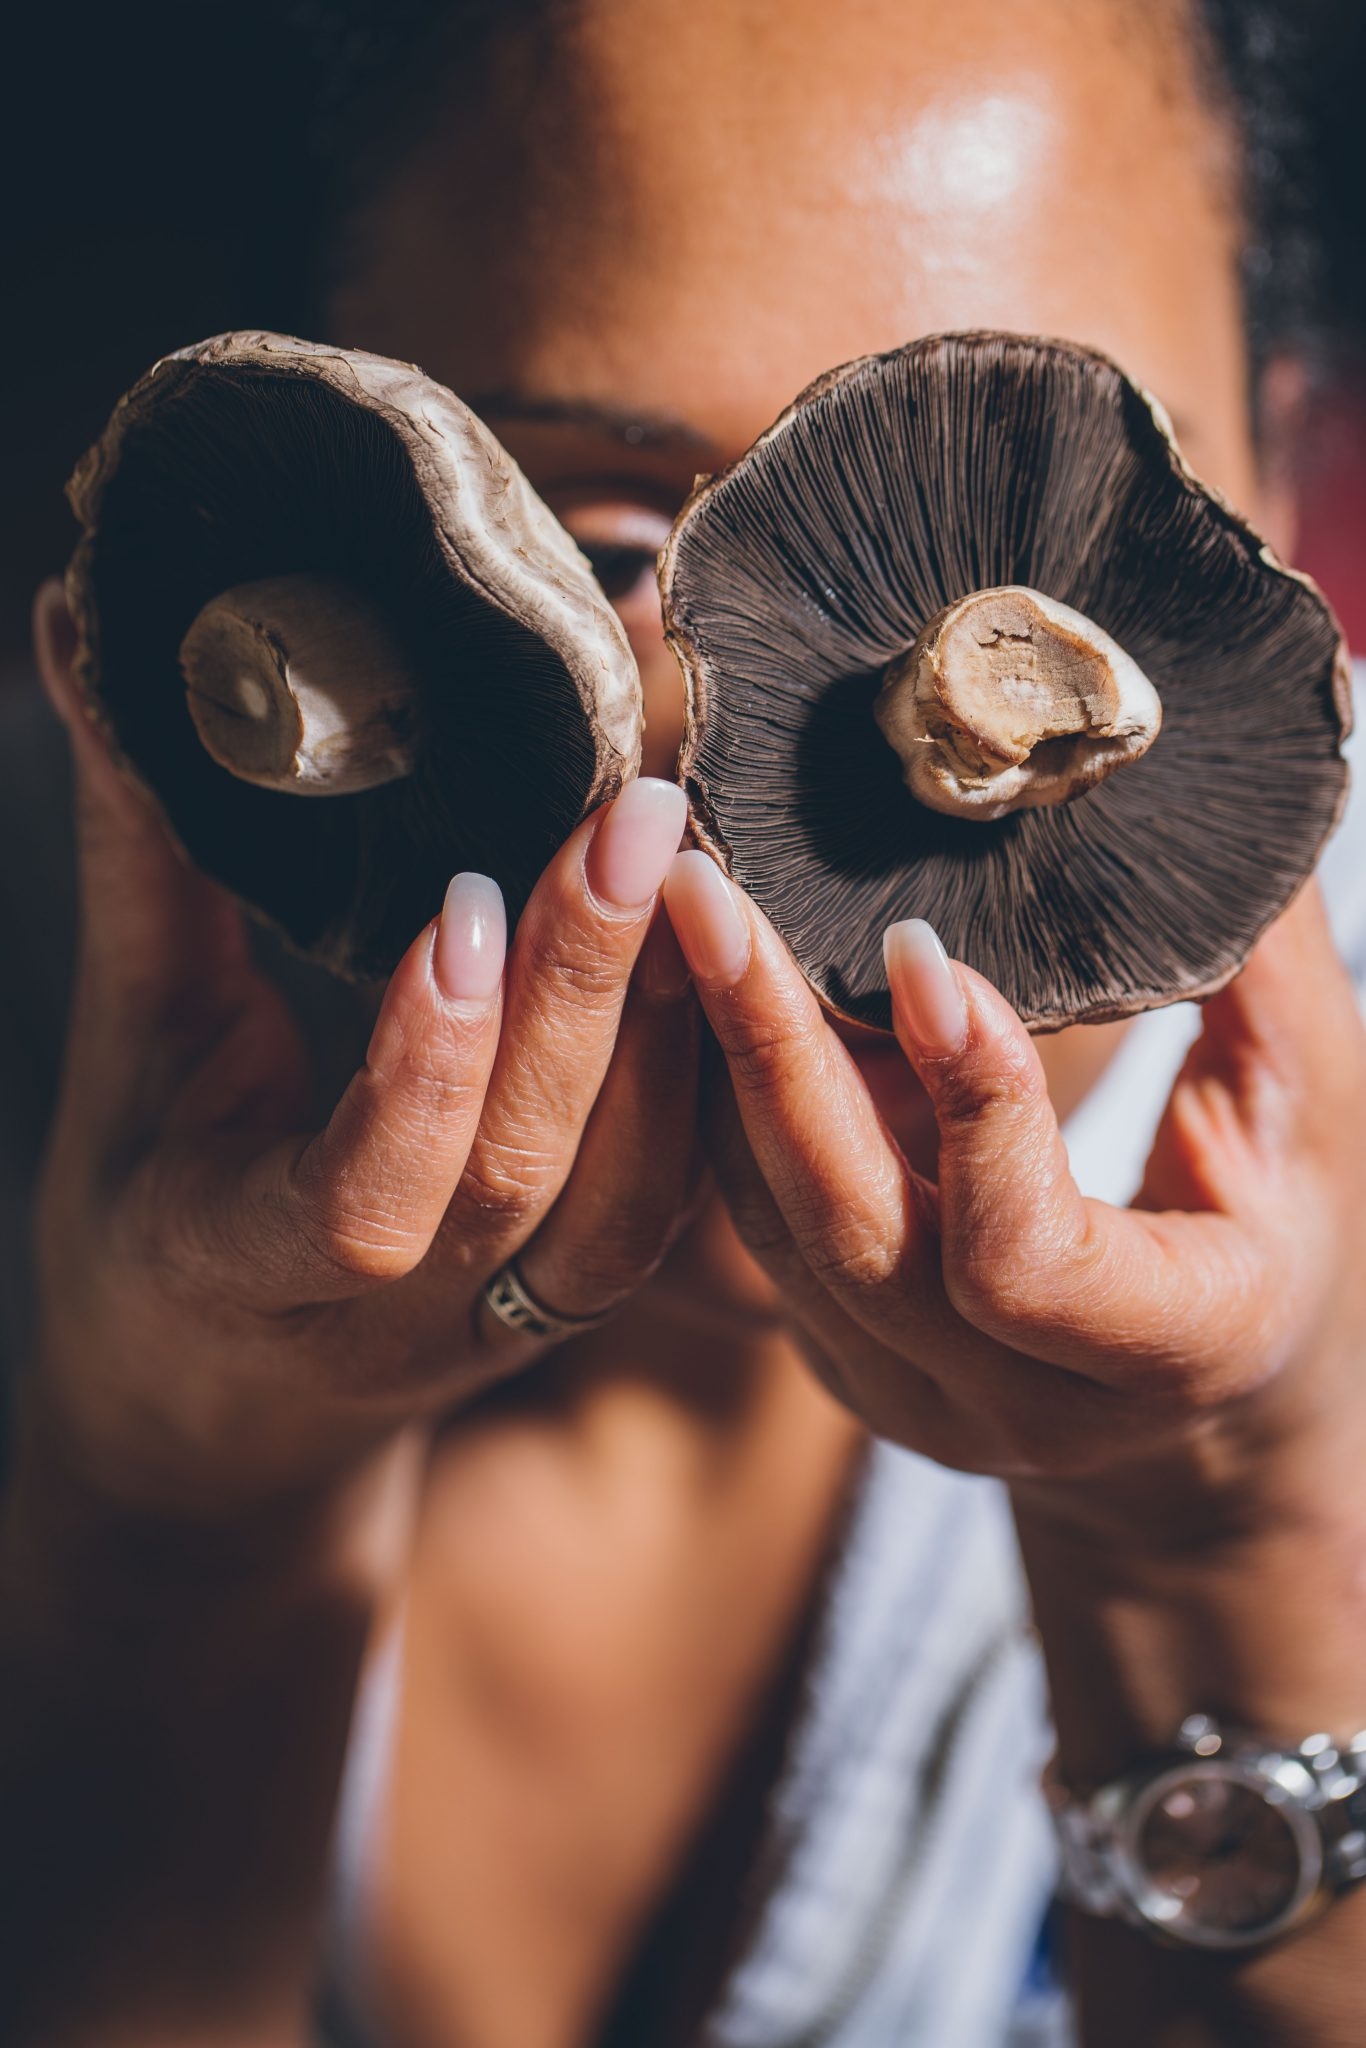 Commercial photo of a woman holding two mushrooms